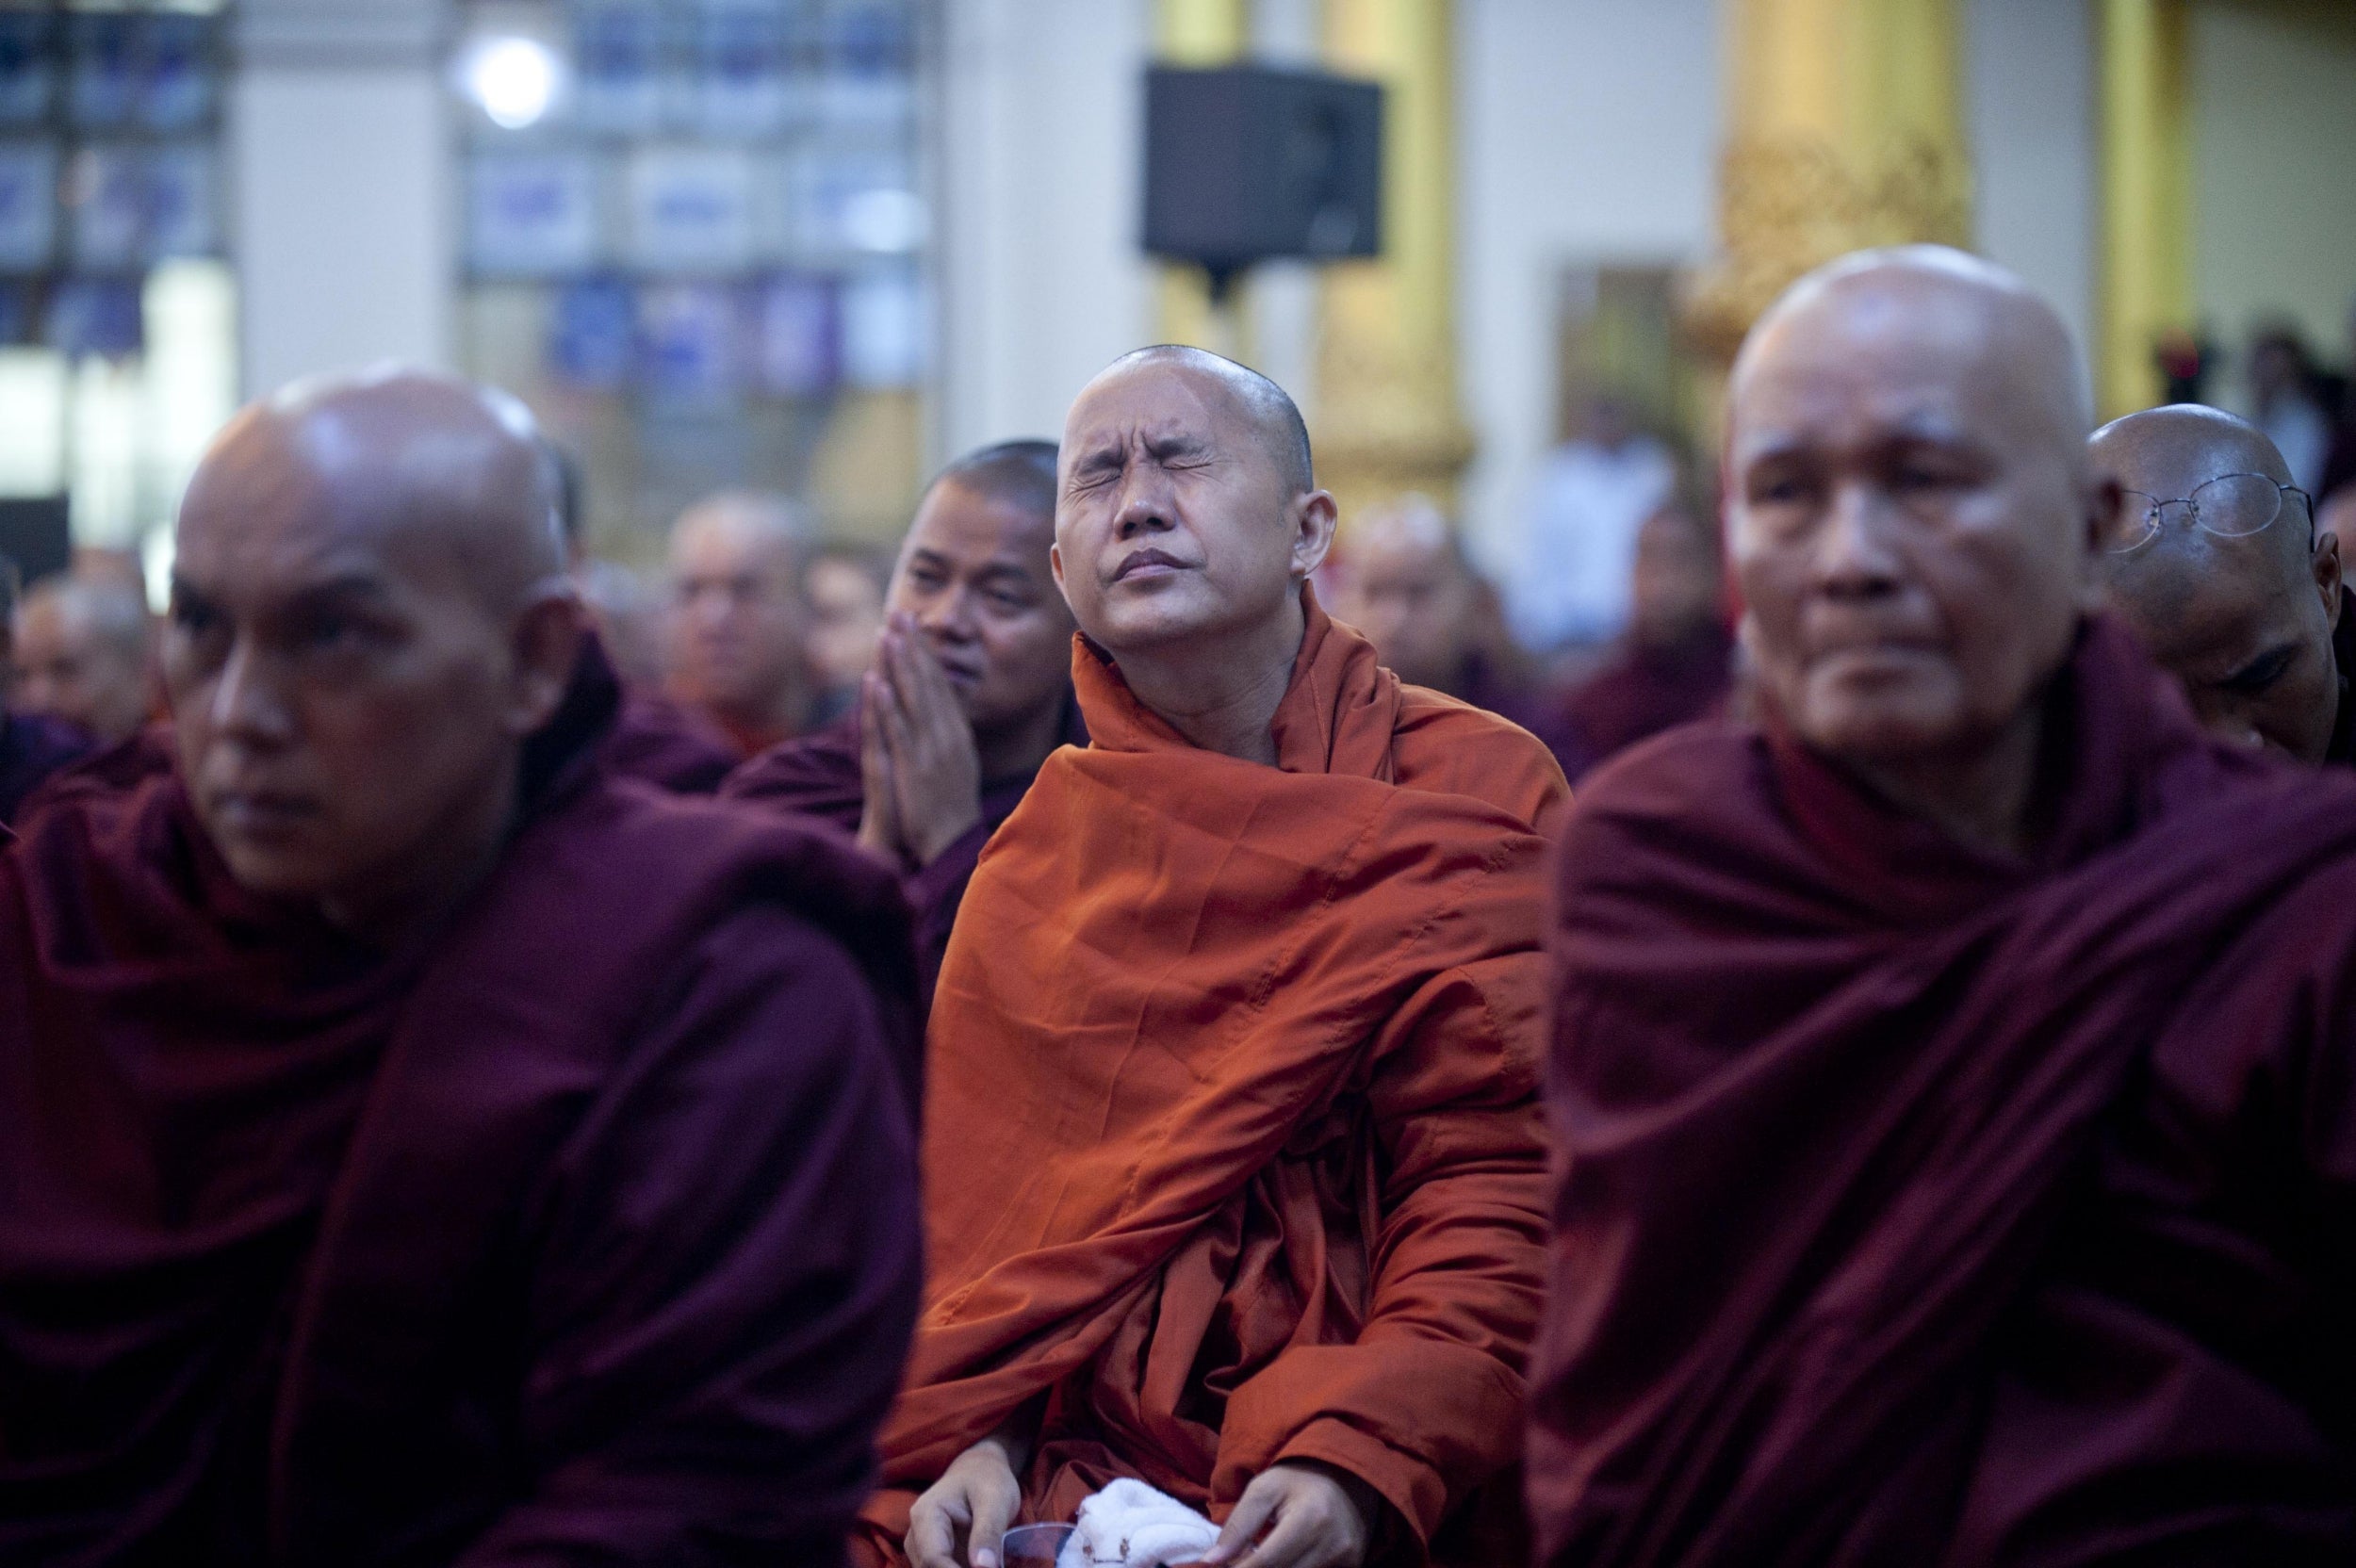 Ashin Wirathu, a controversial monk once jailed for his hate speech, at a meeting in 2013